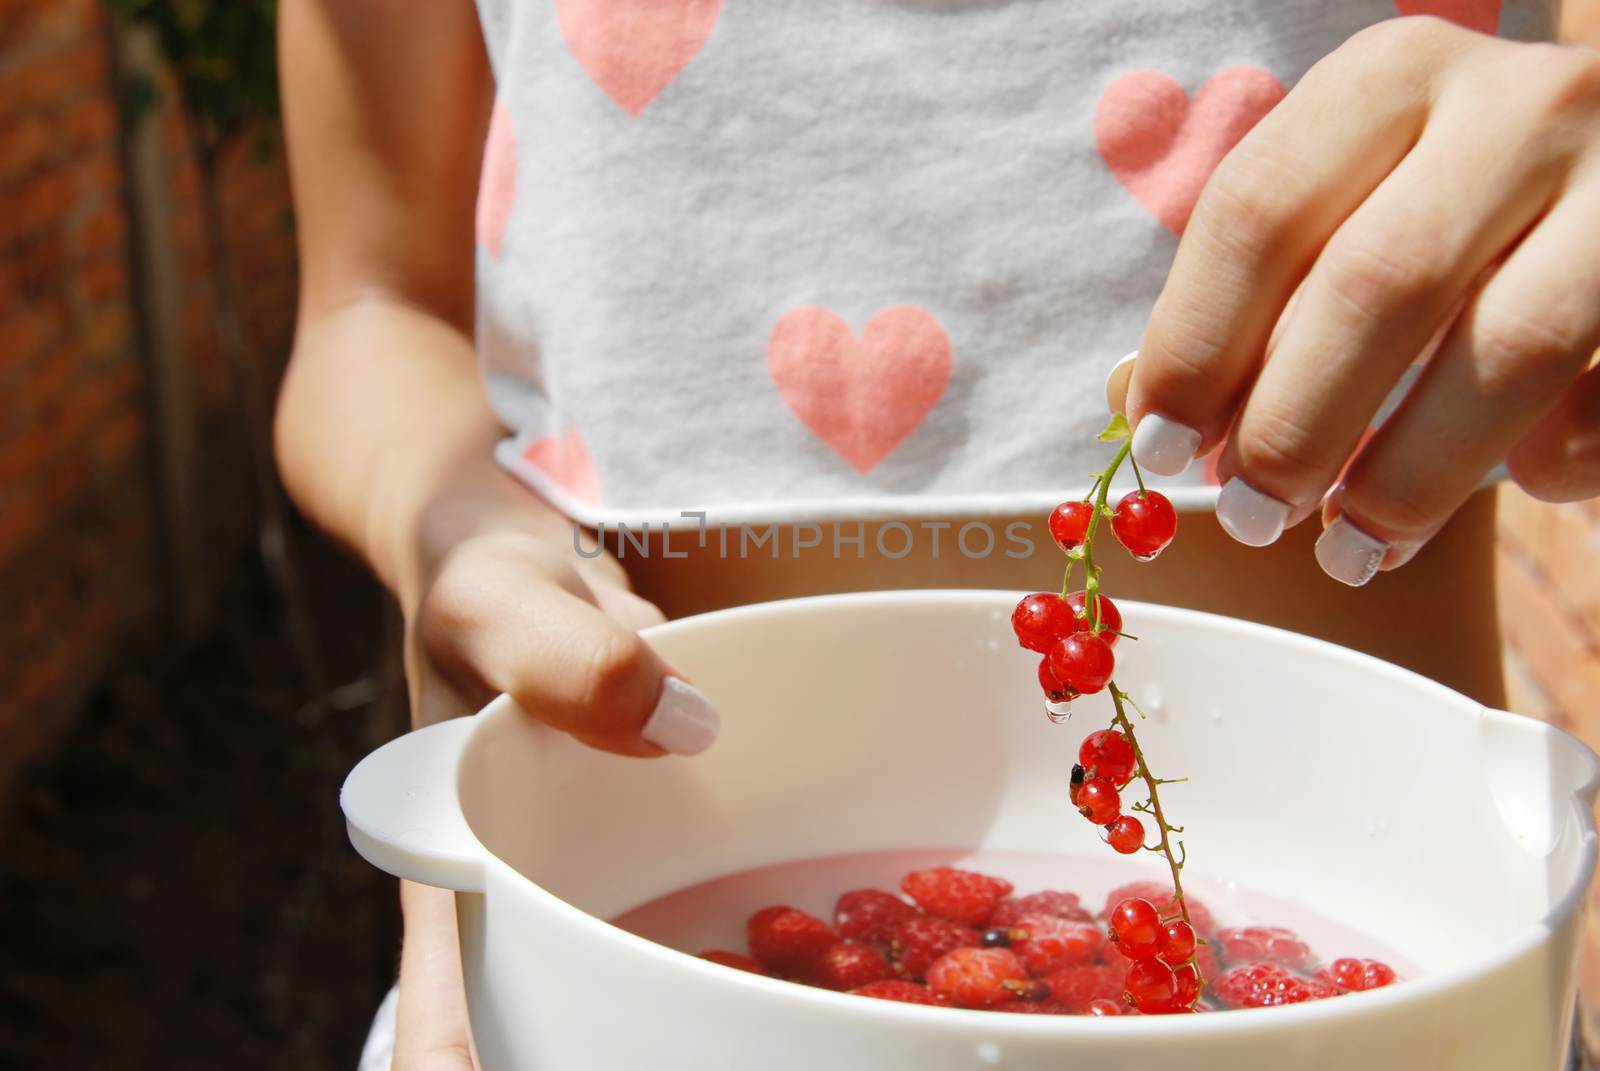 woman hand holding red currants above white bowl full of raspberries